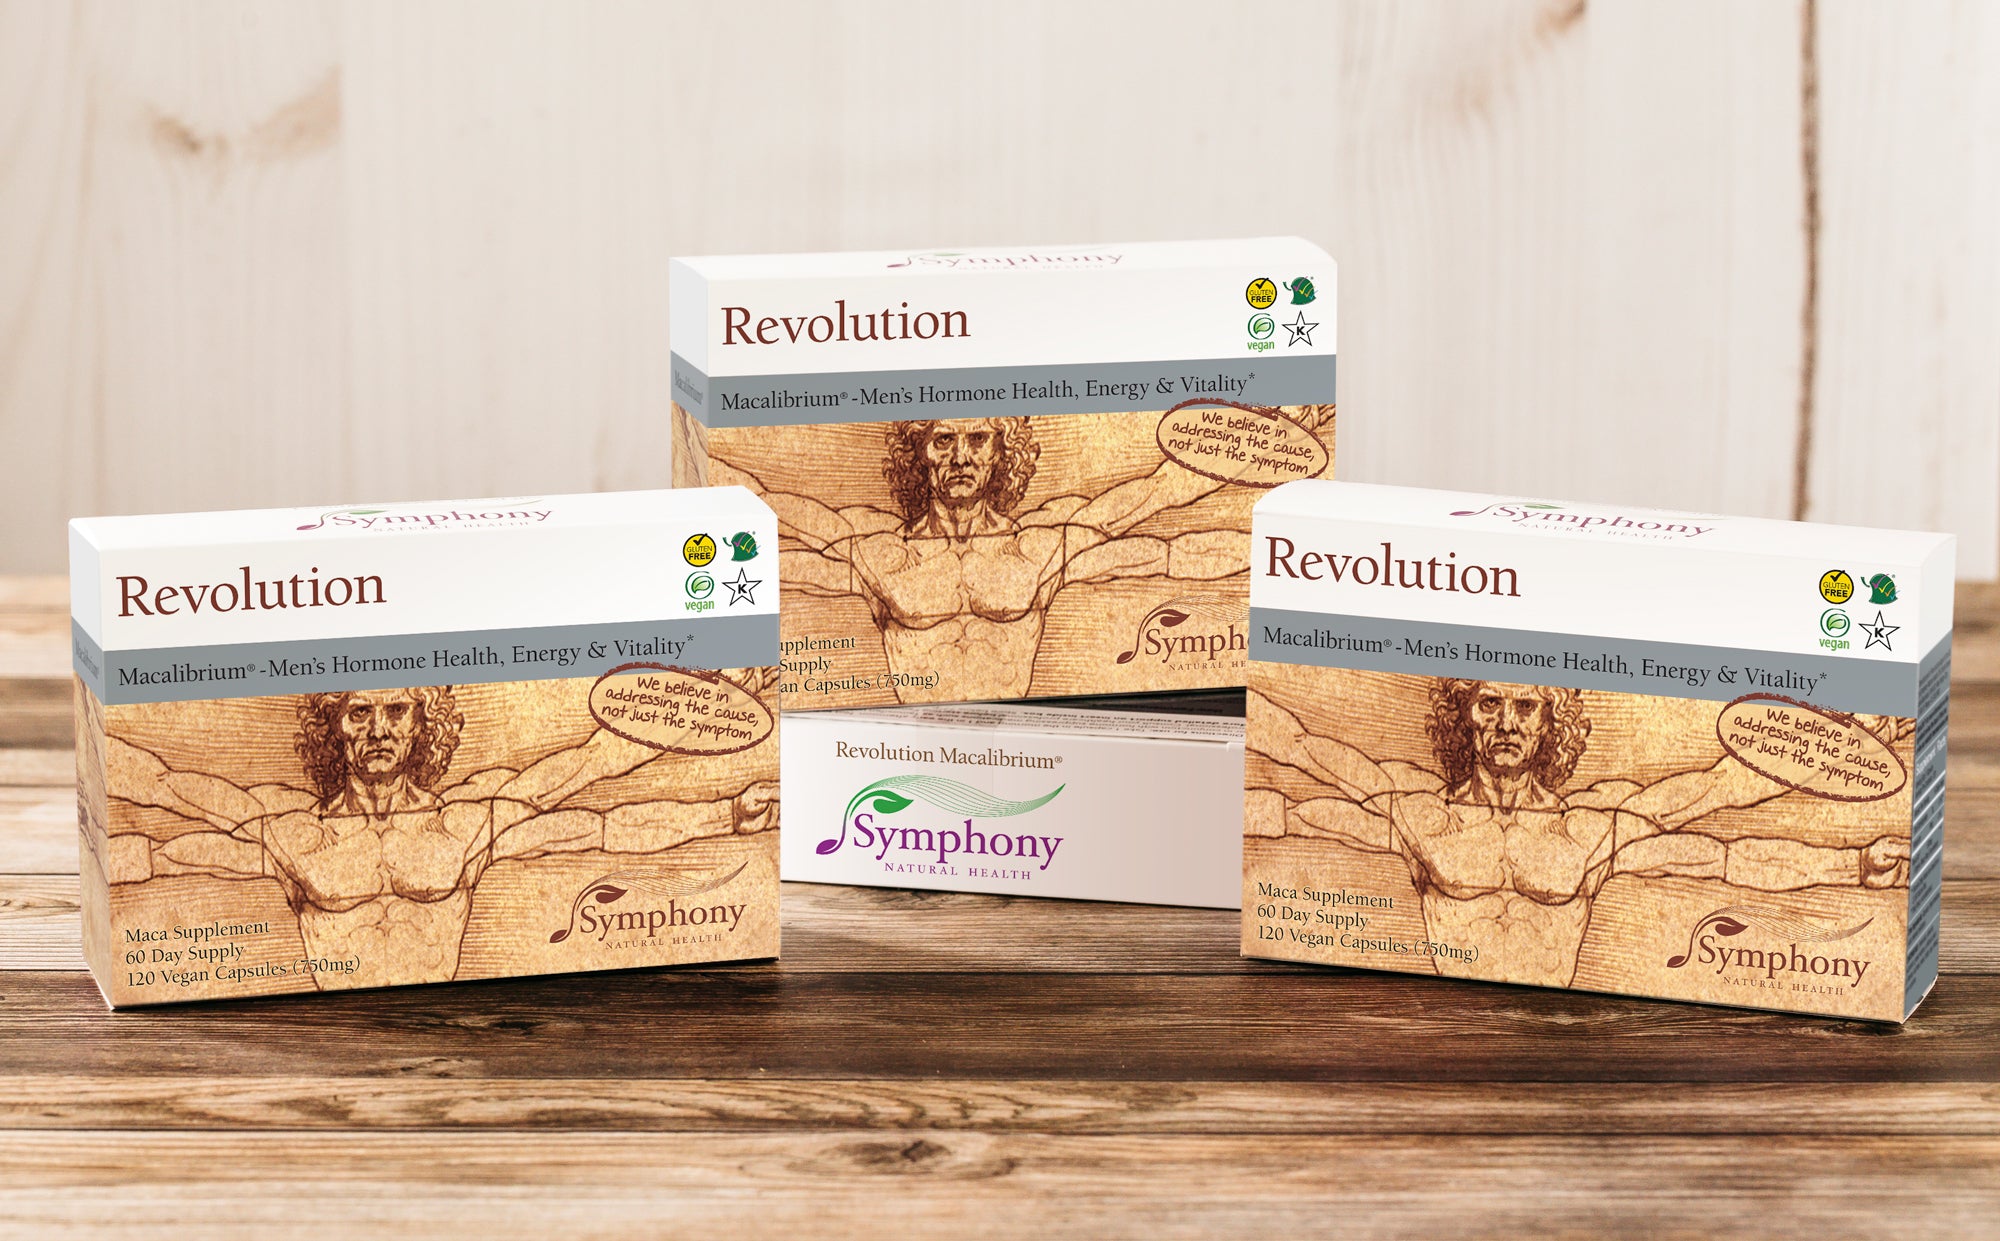 Revolution Macalibrium three product boxes, one elevated by another box laying on side, with Vitruvian Man illustration, we believe in addressing the cause not just the symptom, vegan, gluten free, Kosher, on light brown wood background